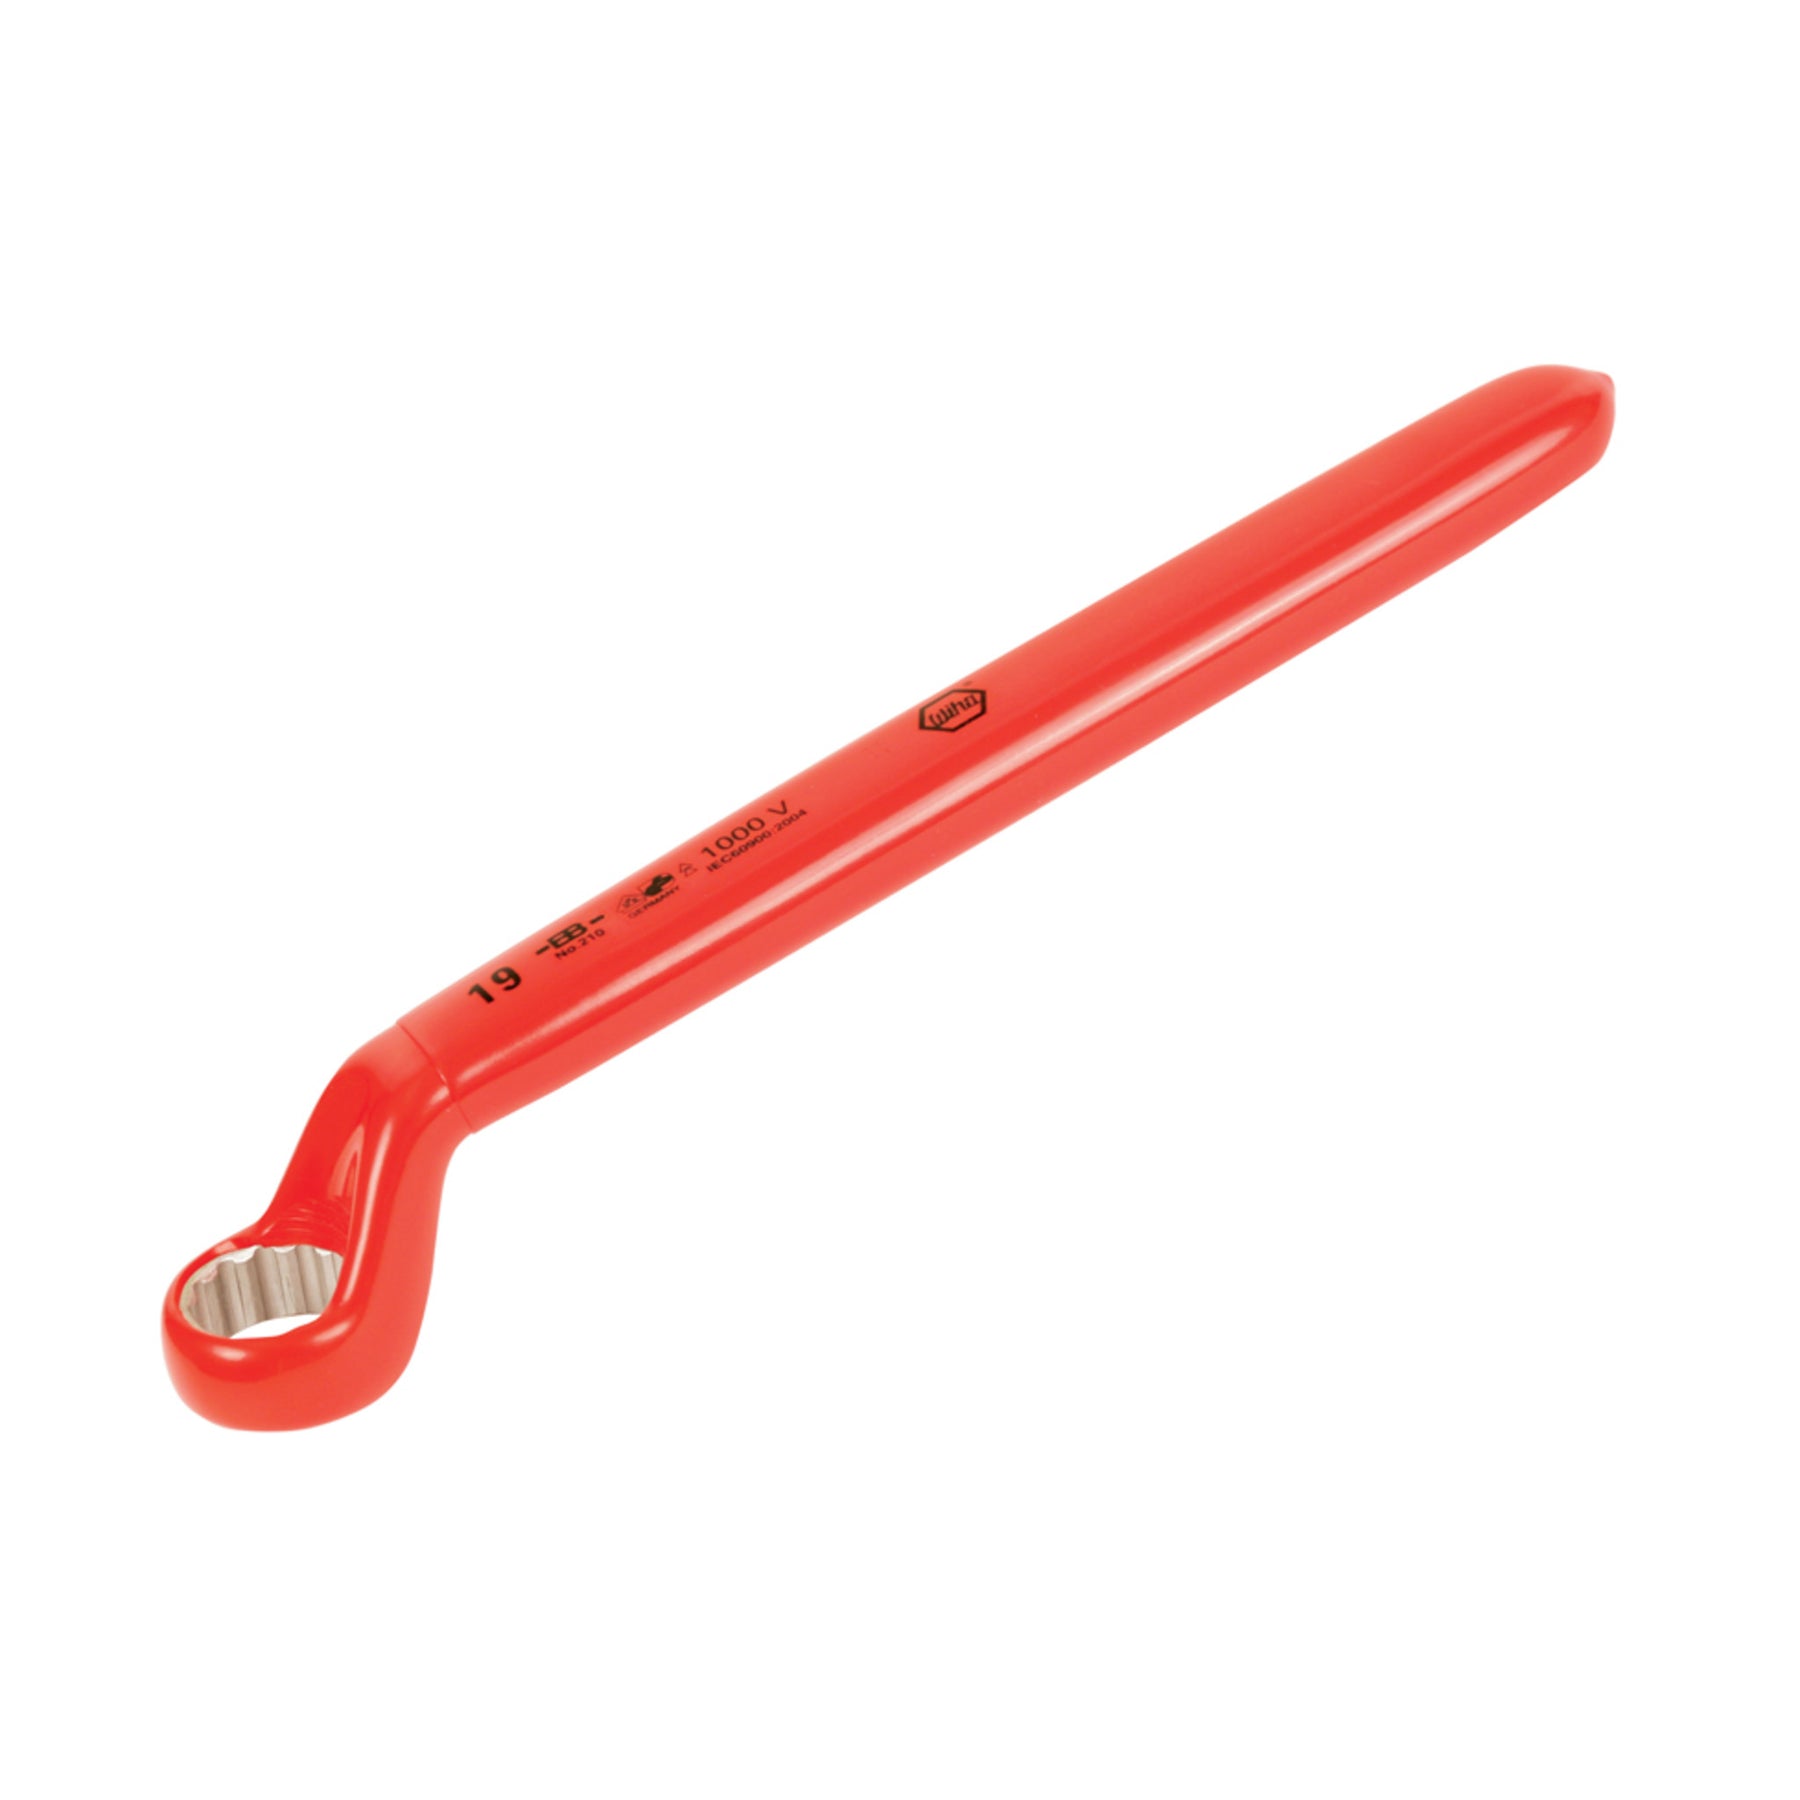 Insulated Deep Offset Wrench 1/2"